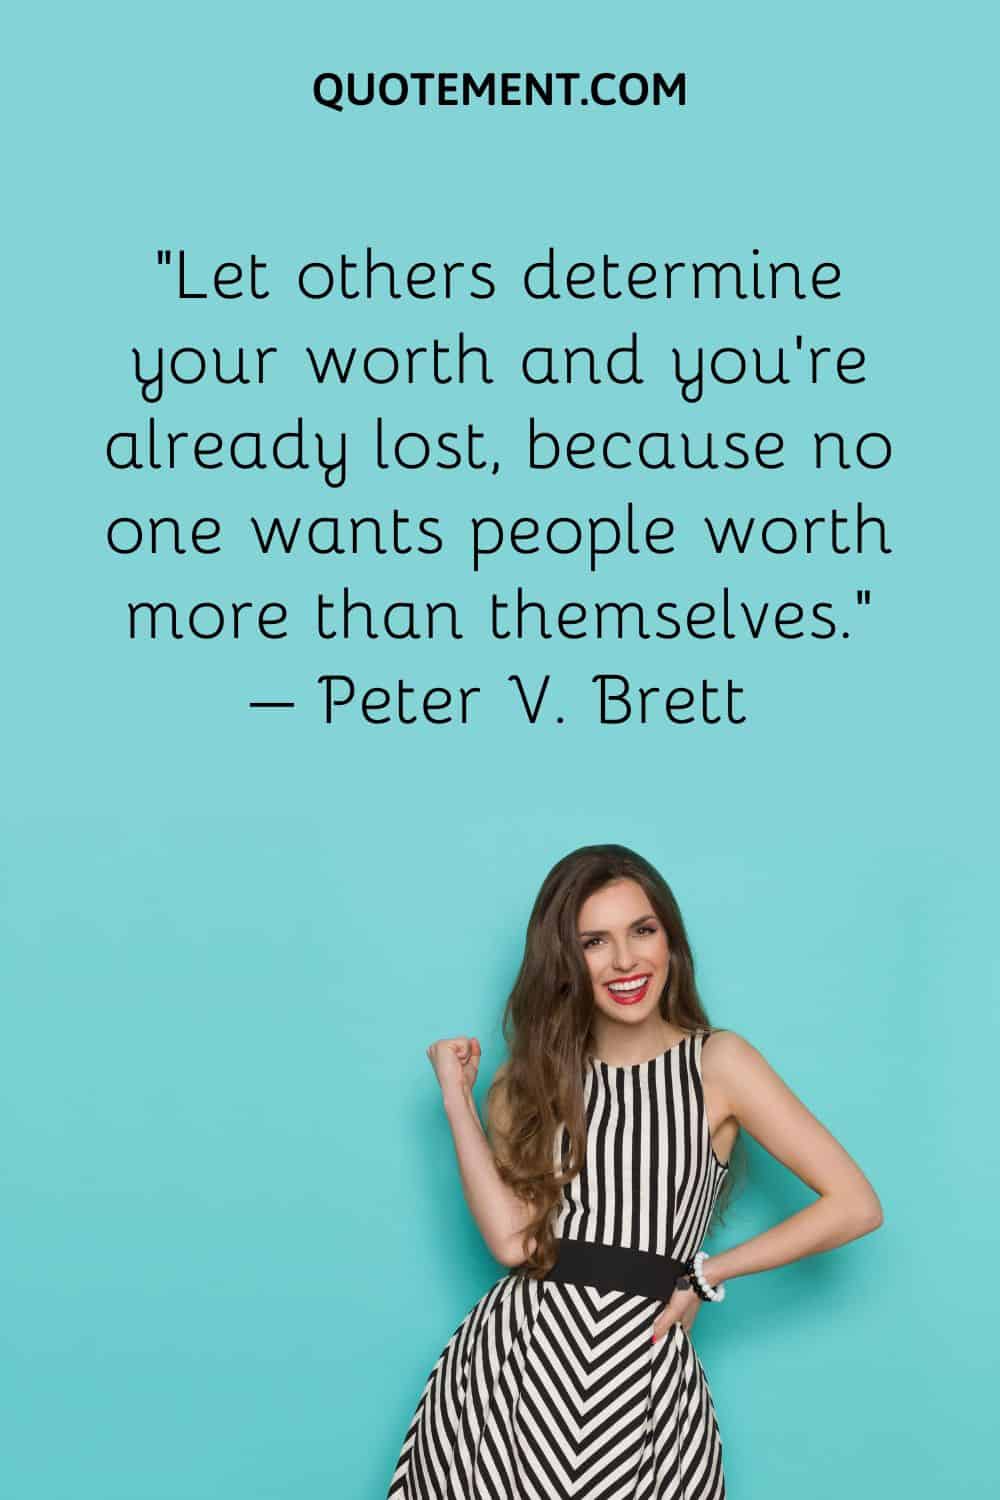 Let others determine your worth and you're already lost, because no one wants people worth more than themselves